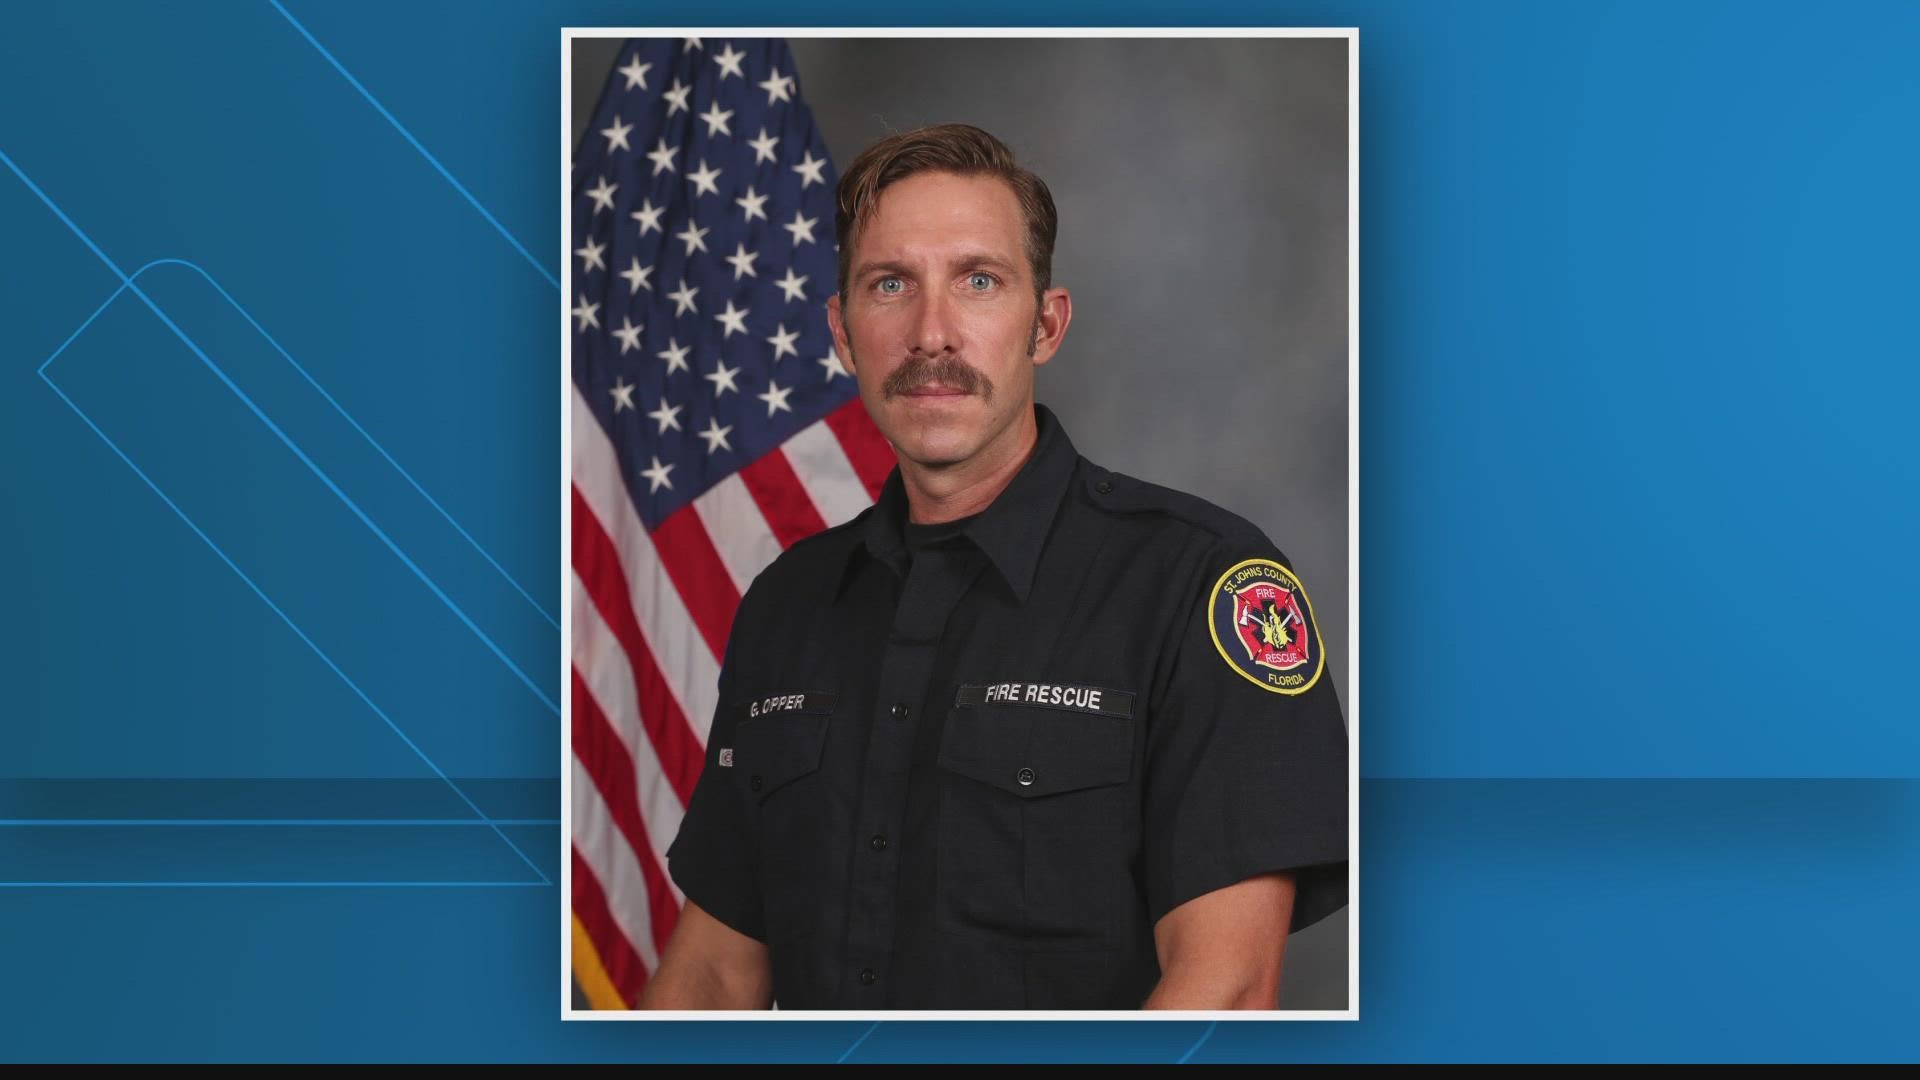 St. Johns County Fire Rescue announced the death of Engineer Garrett A. Opper on Thursday.